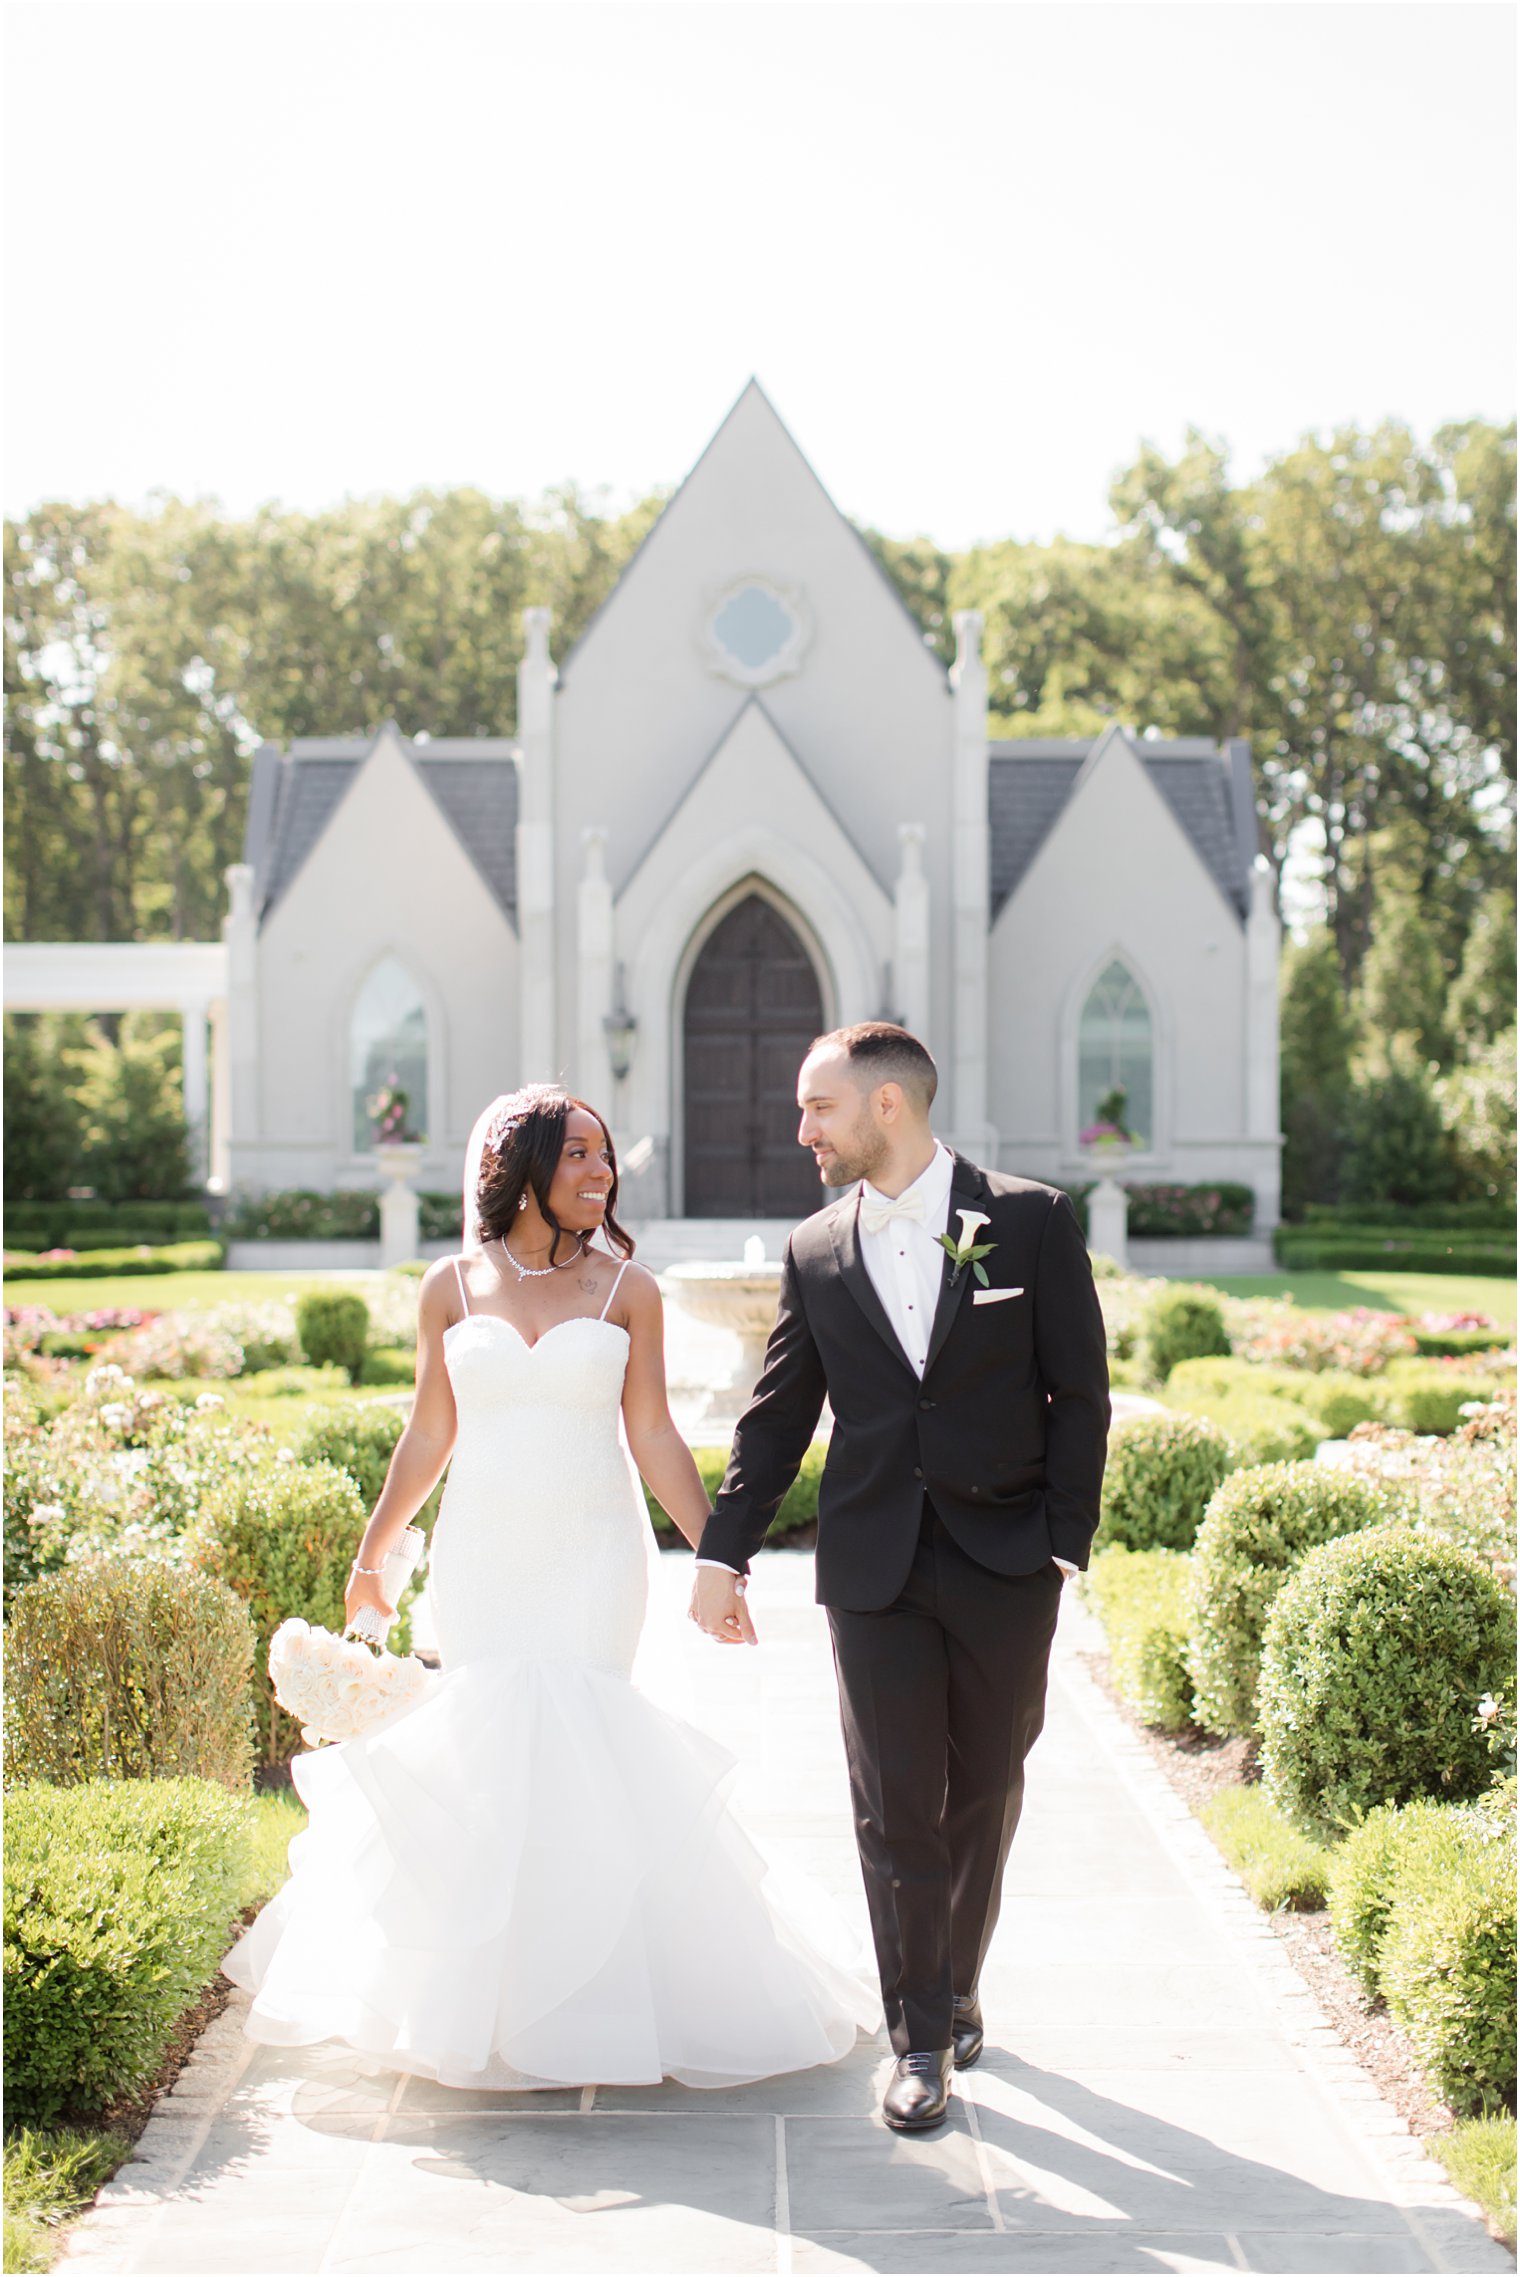 Bride and groom walking | Biracial Wedding at Park Chateau Estate